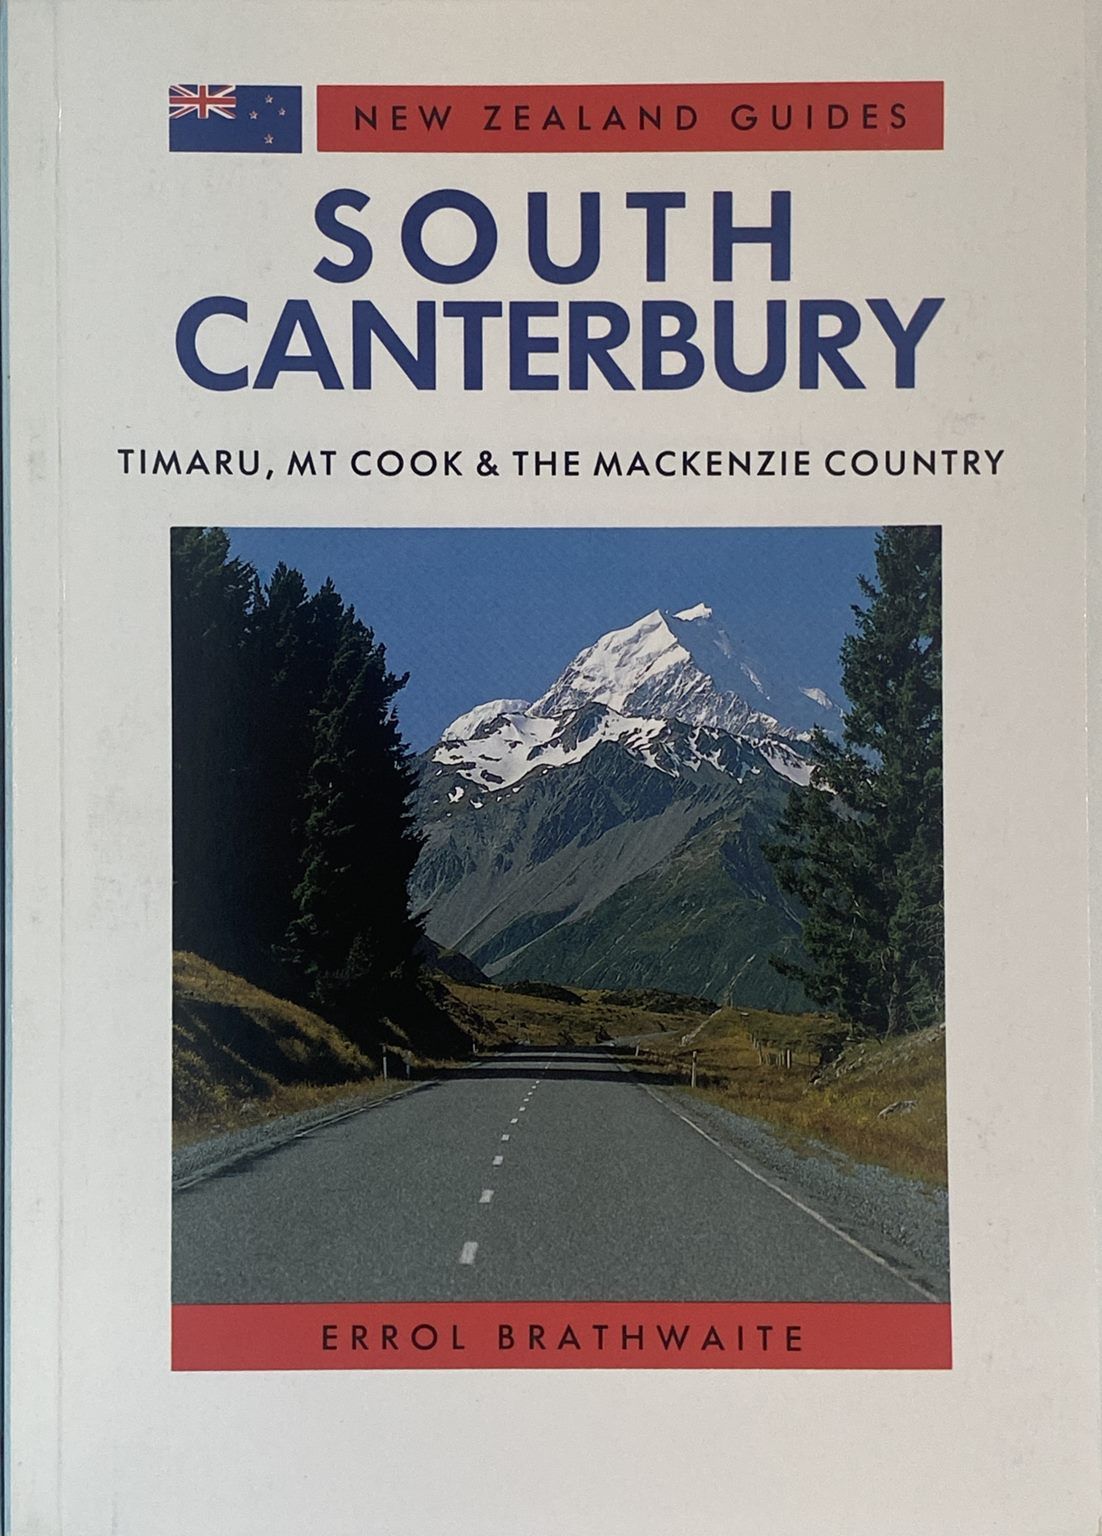 SOUTH CANTERBURY: Timaru, Mt Cook & The Mackenzie Country